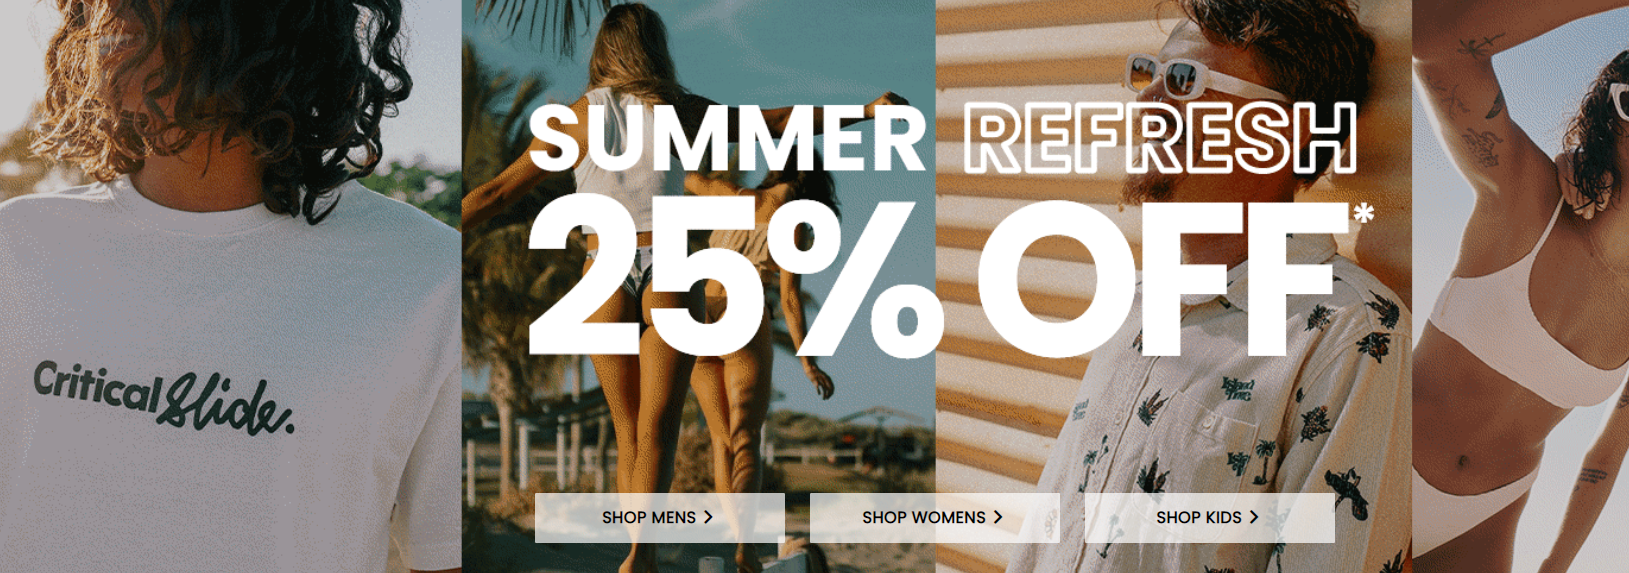 25% OFF 1000's of Summer styles @ Surfstitch, Free shipping $75+